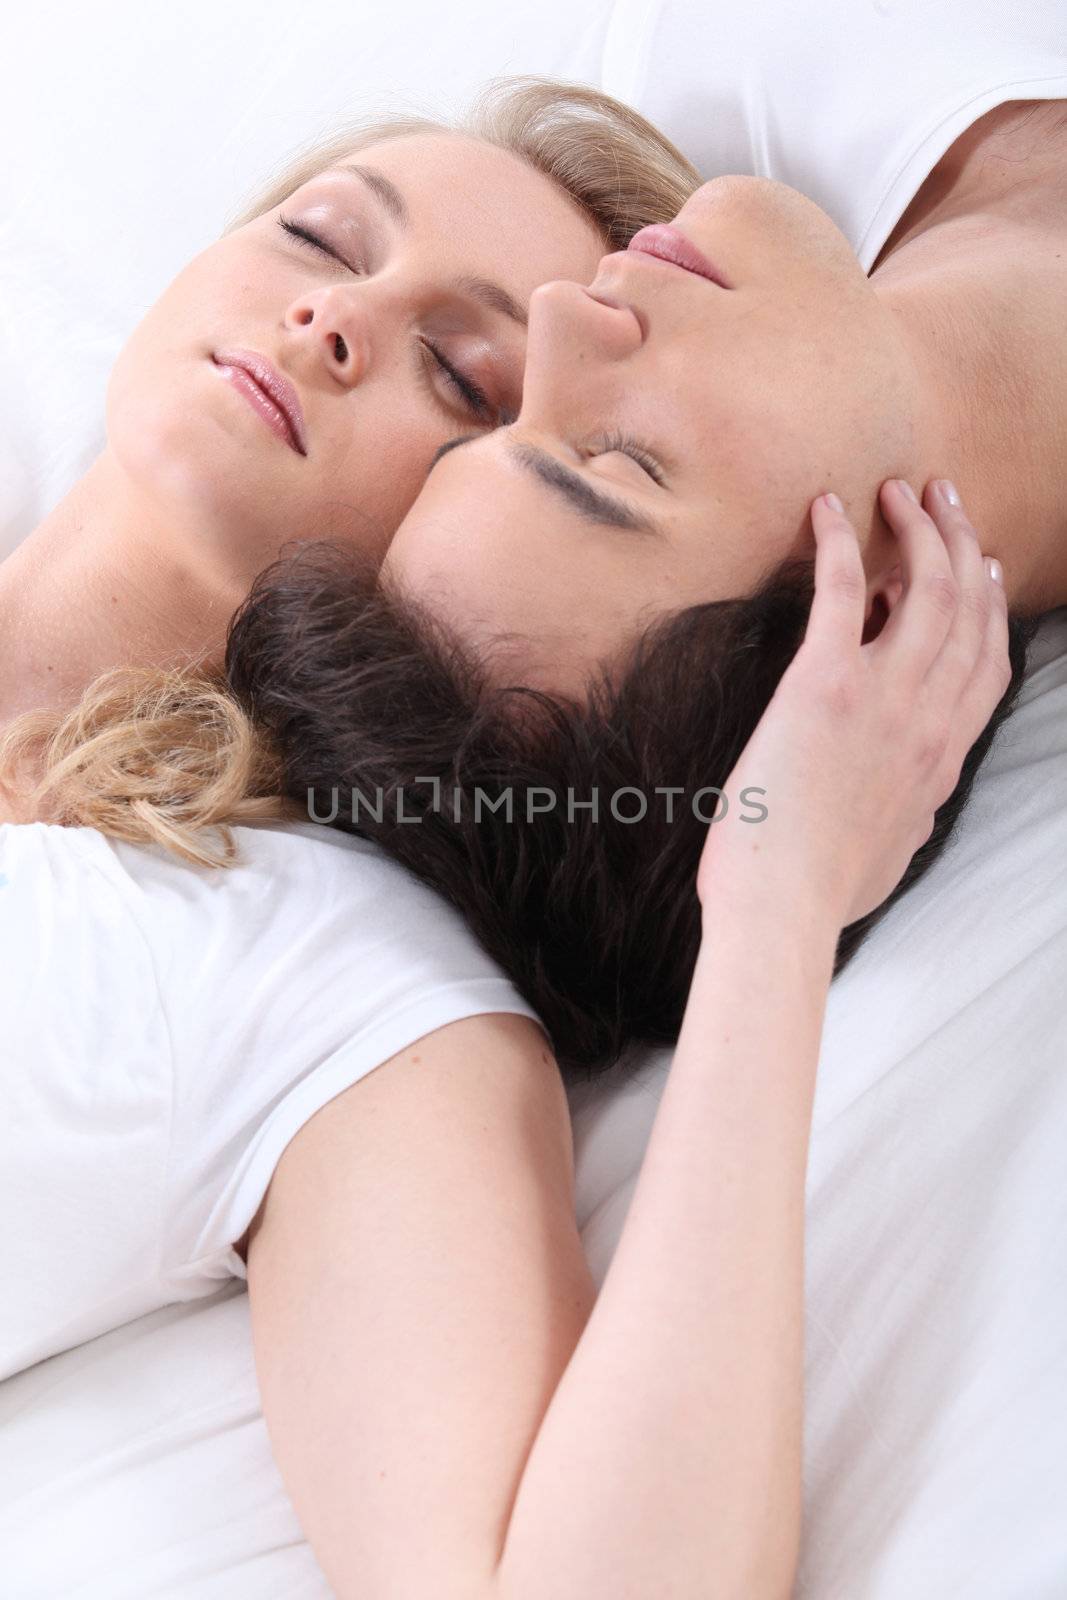 Sleeping couple in bed by phovoir